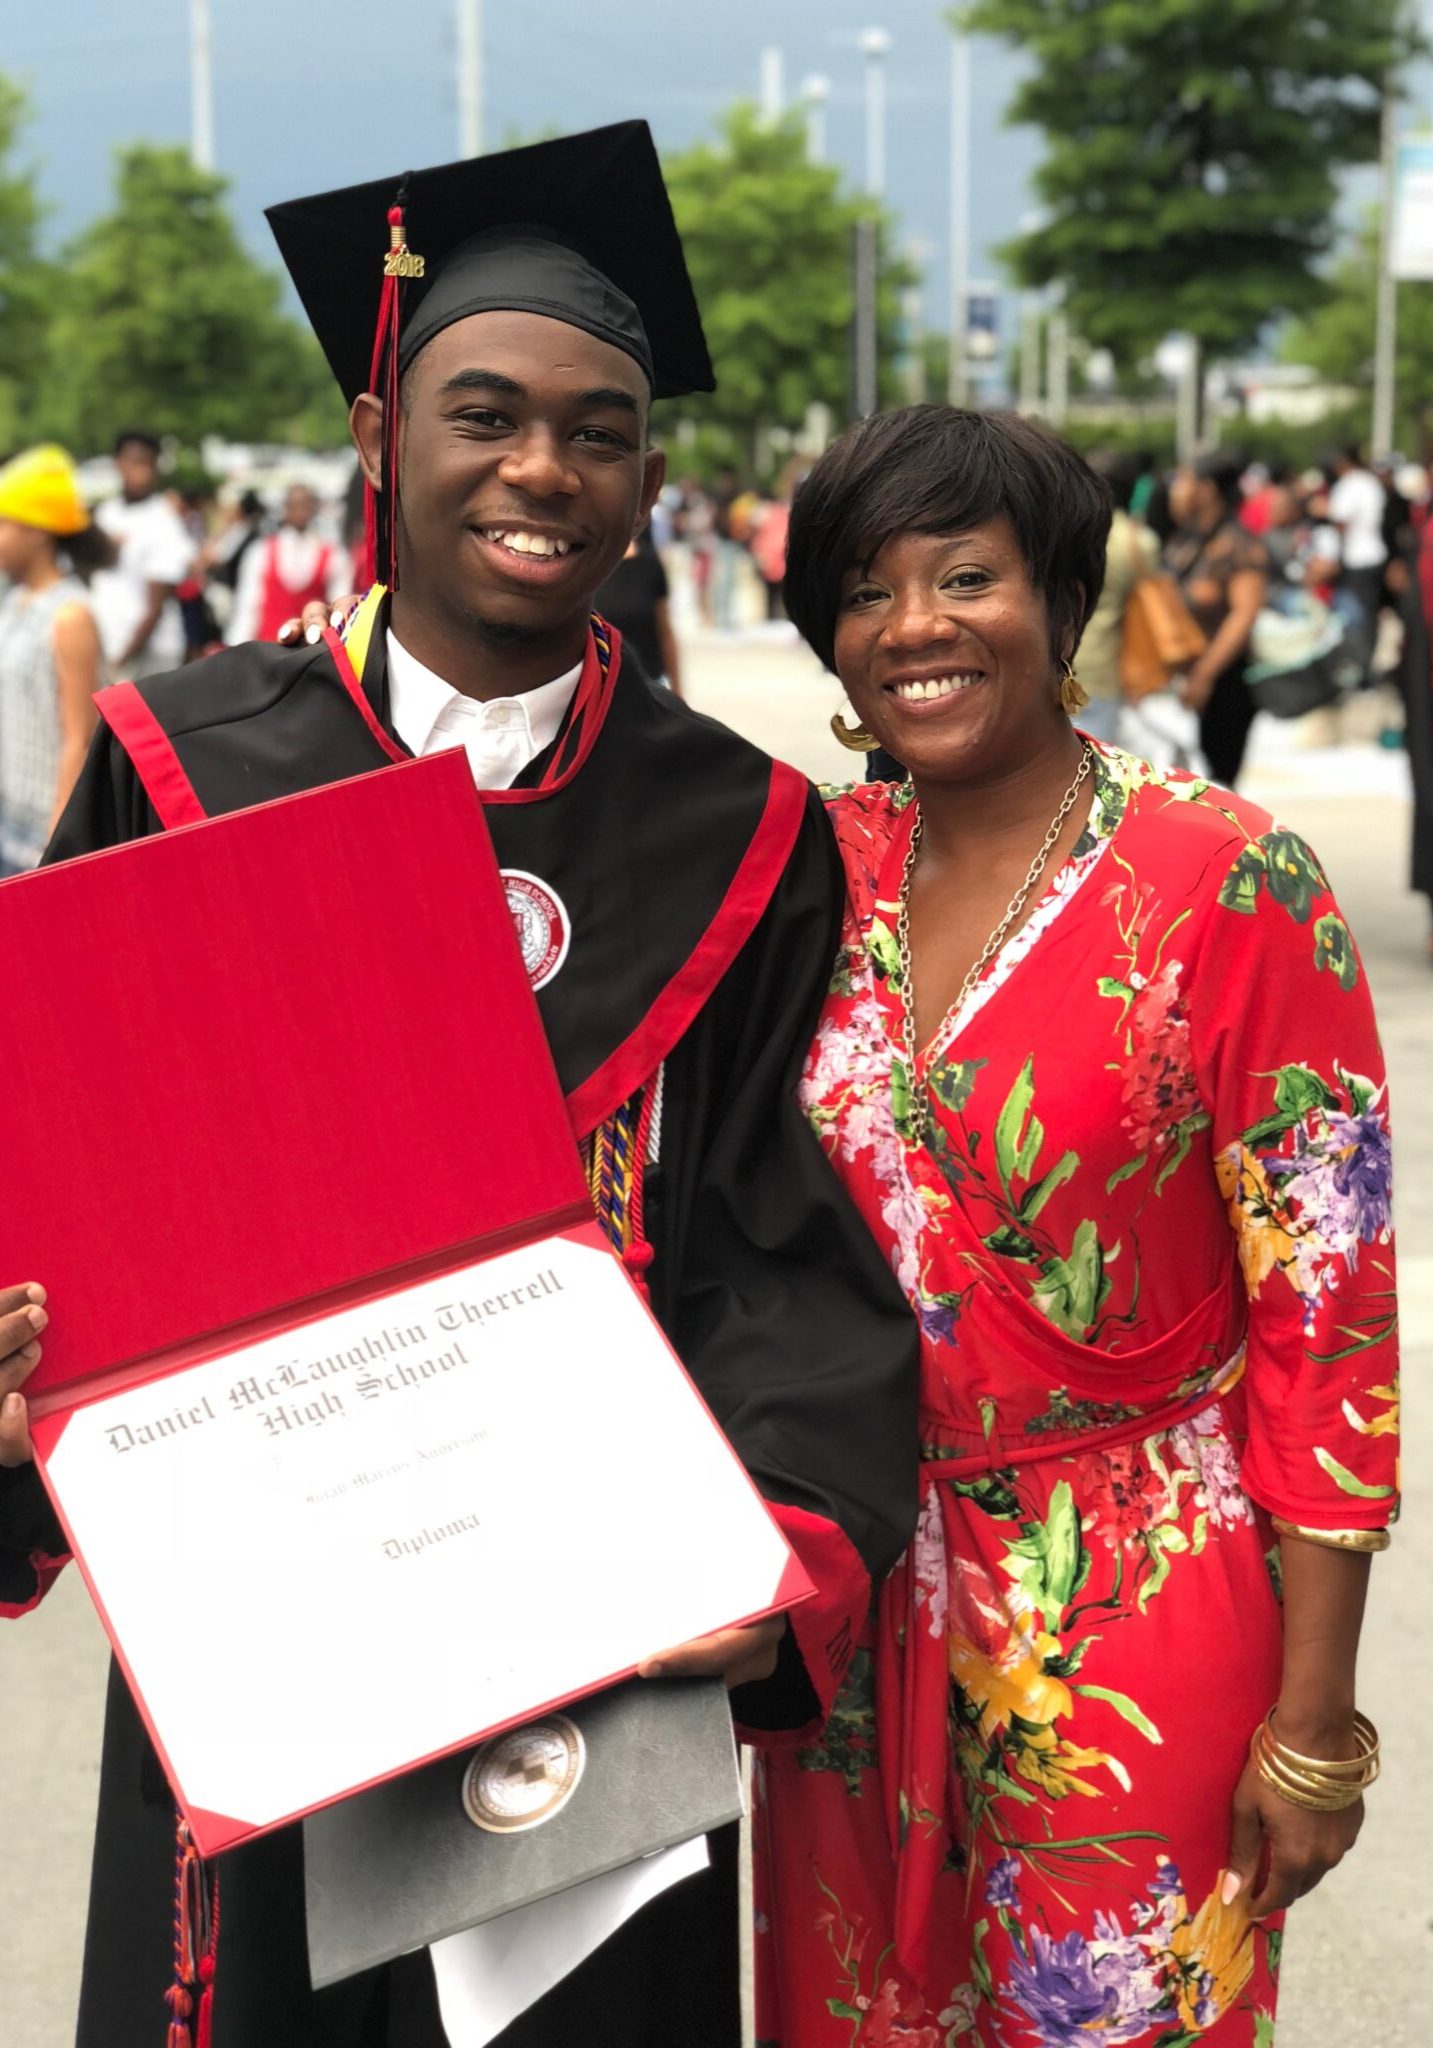 Student and mother attending a graduation